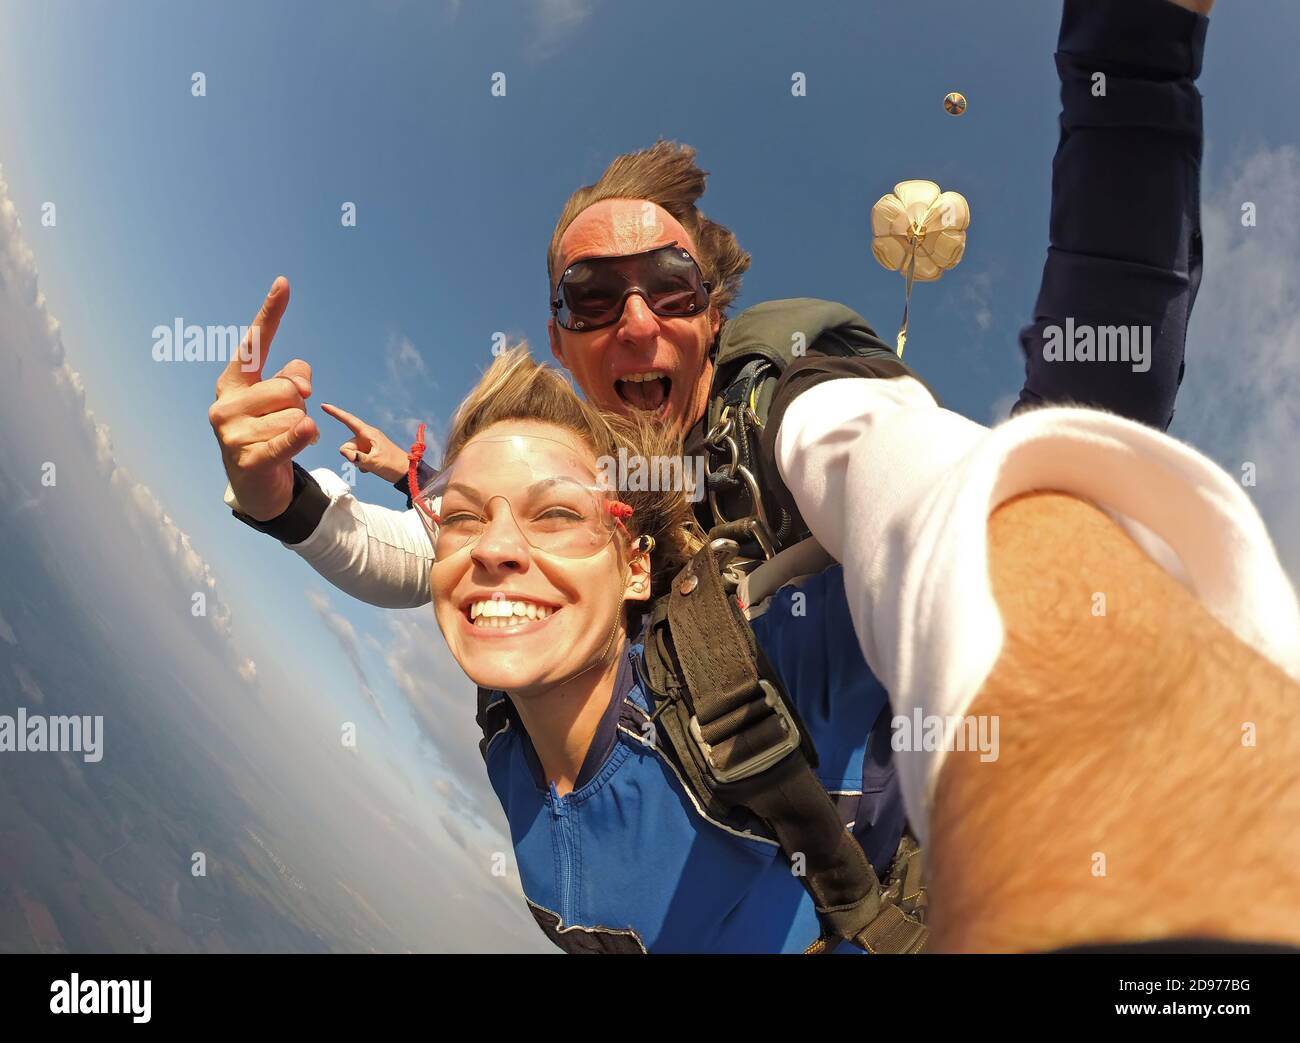 Selfie tandem skydiving with pretty woman Stock Photo